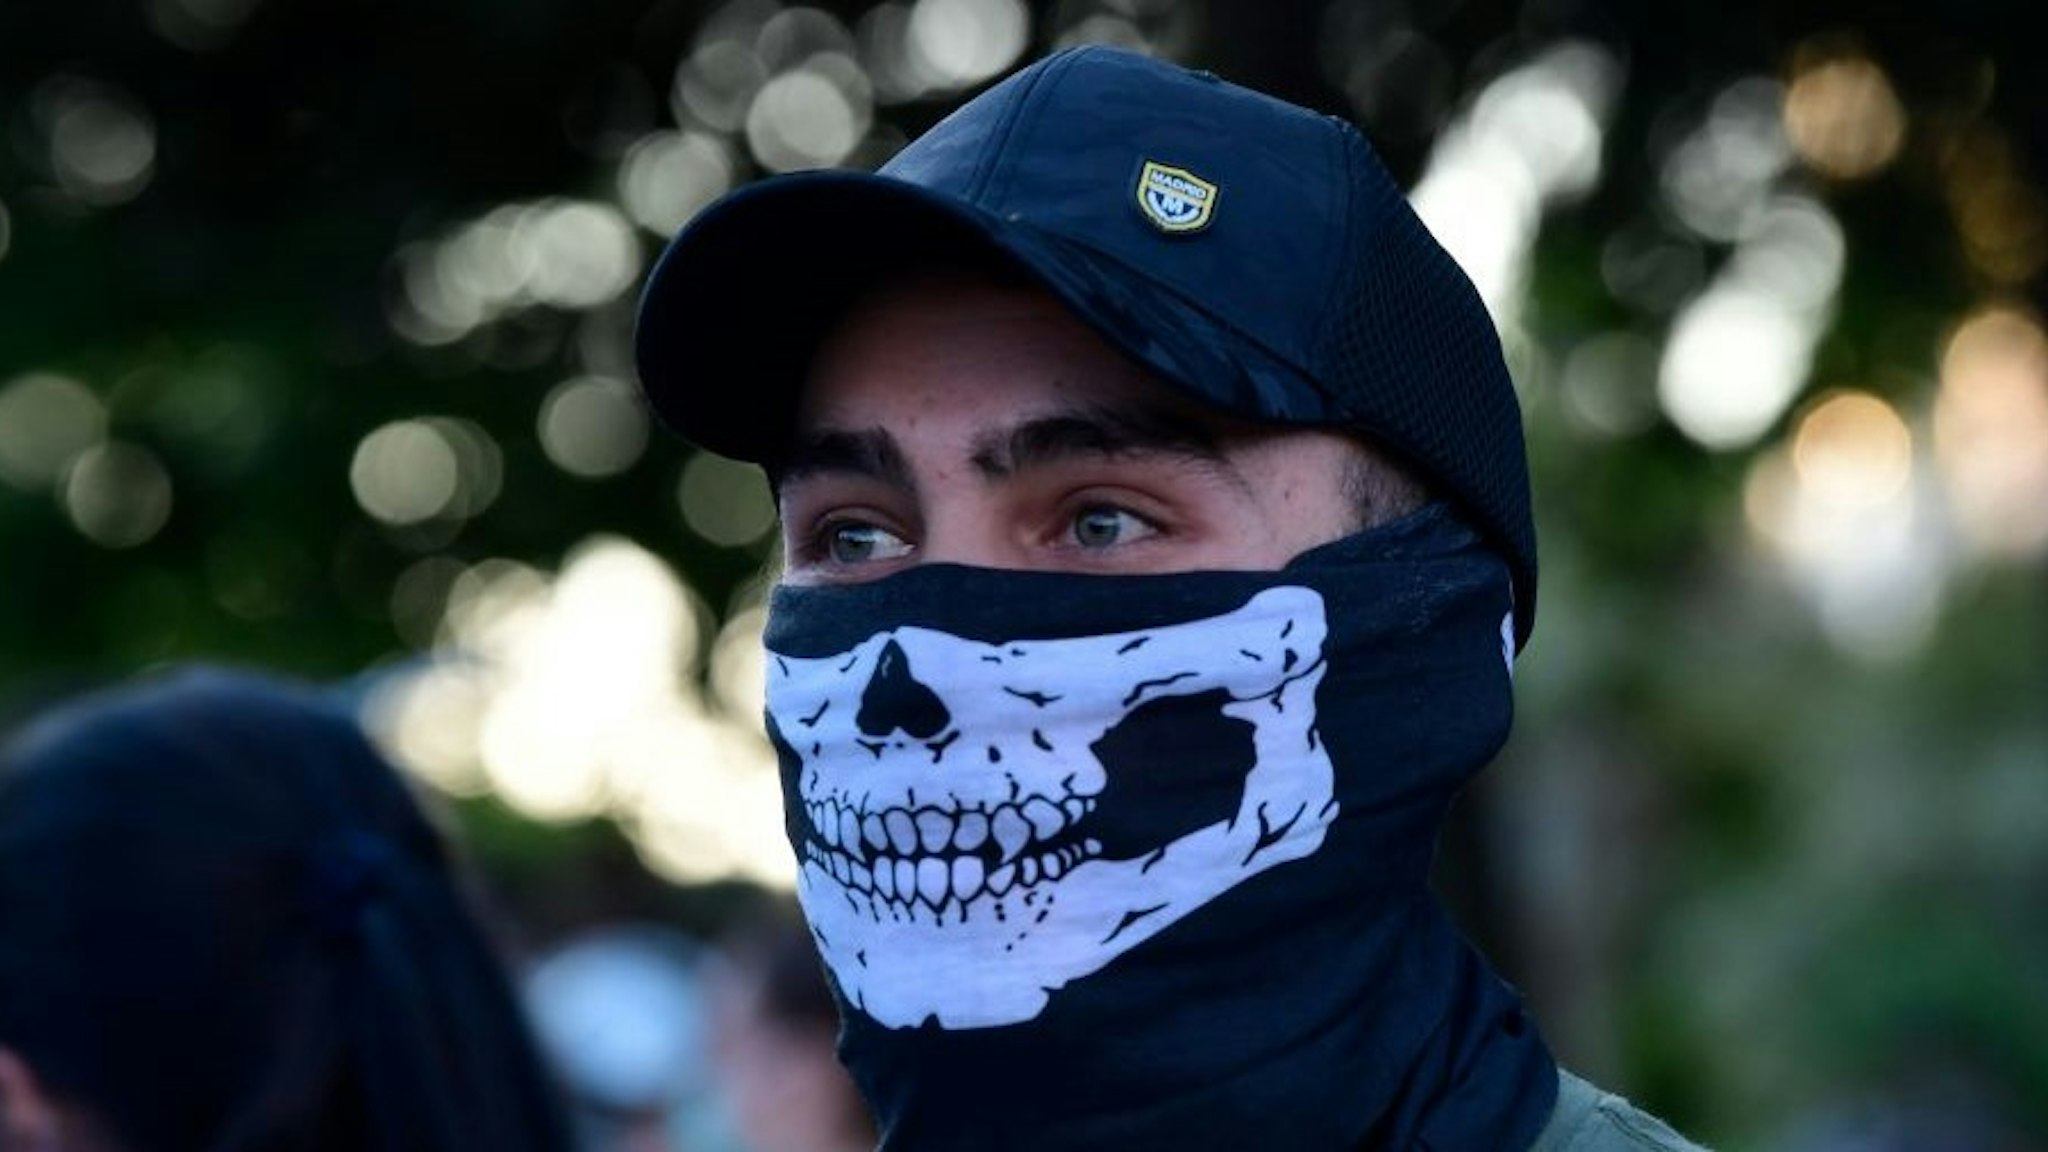 A demonstrator covers his face with a neck gaiter as he takes part in a demonstration against the government's handling of the coronavirus crisis, on May 20, 2020, in Alcorcon, near Madrid. - Spain's prime minister won parliamentary backing extend the lockdown for another two weeks today, despite opposition from his rightwing opponents and protests against his minority coalition government. It was the fifth time the state of emergency has been renewed, meaning the restrictions will remain in force until June 6 in a measure passed by 177 votes in favour, 162 against and 11 abstentions. (Photo by JAVIER SORIANO / AFP) (Photo by